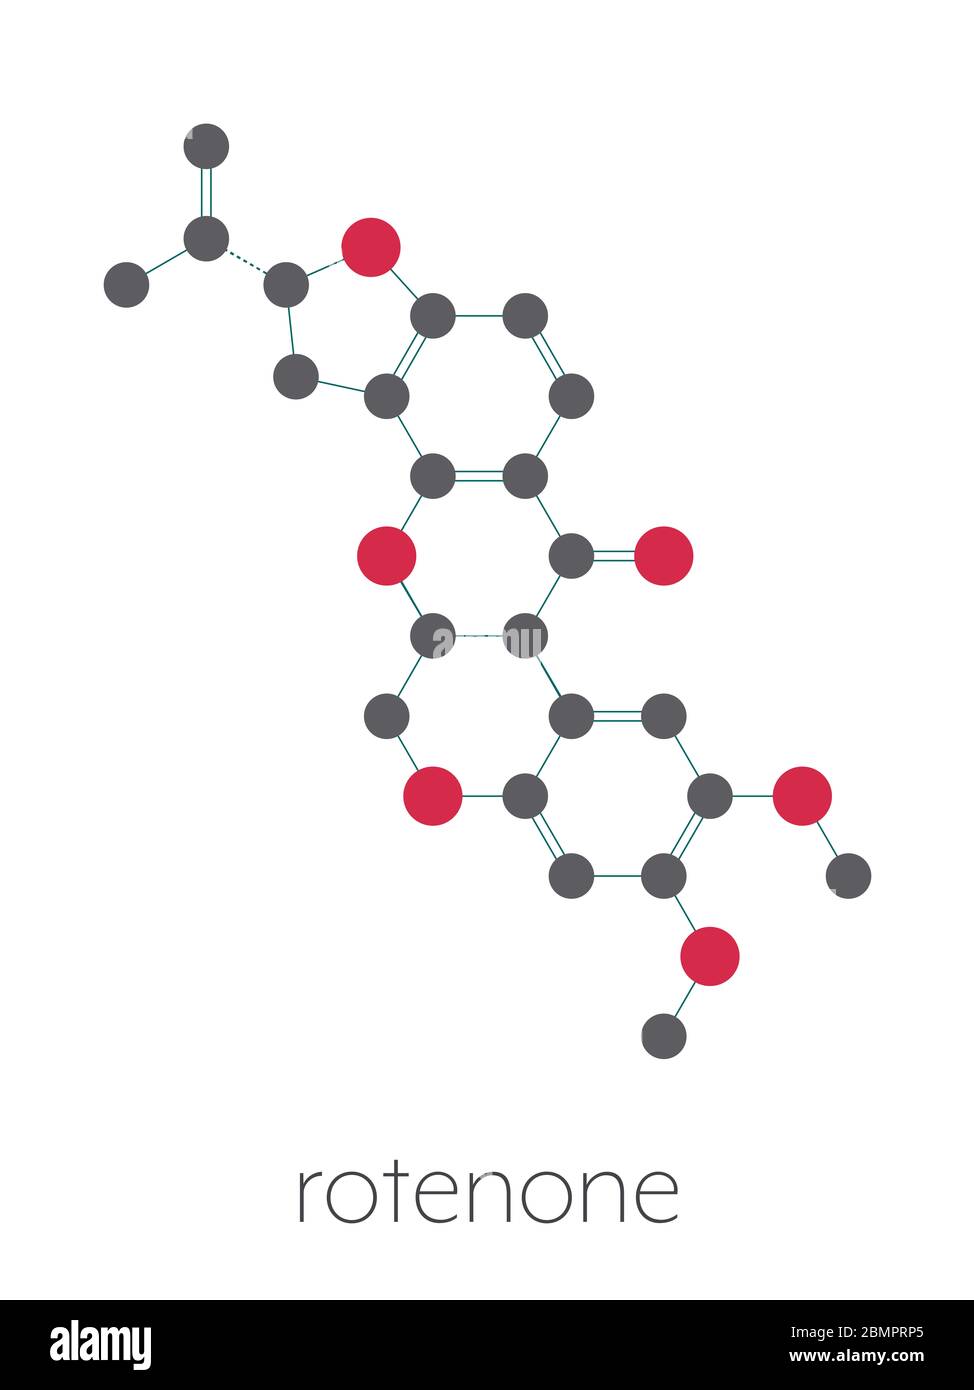 Rotenone broad-spectrum insecticide molecule. Also linked to development of Parkinson's disease. Stylized skeletal formula (chemical structure): Atoms are shown as color-coded circles: hydrogen (hidden), carbon (grey), oxygen (red). Stock Photo